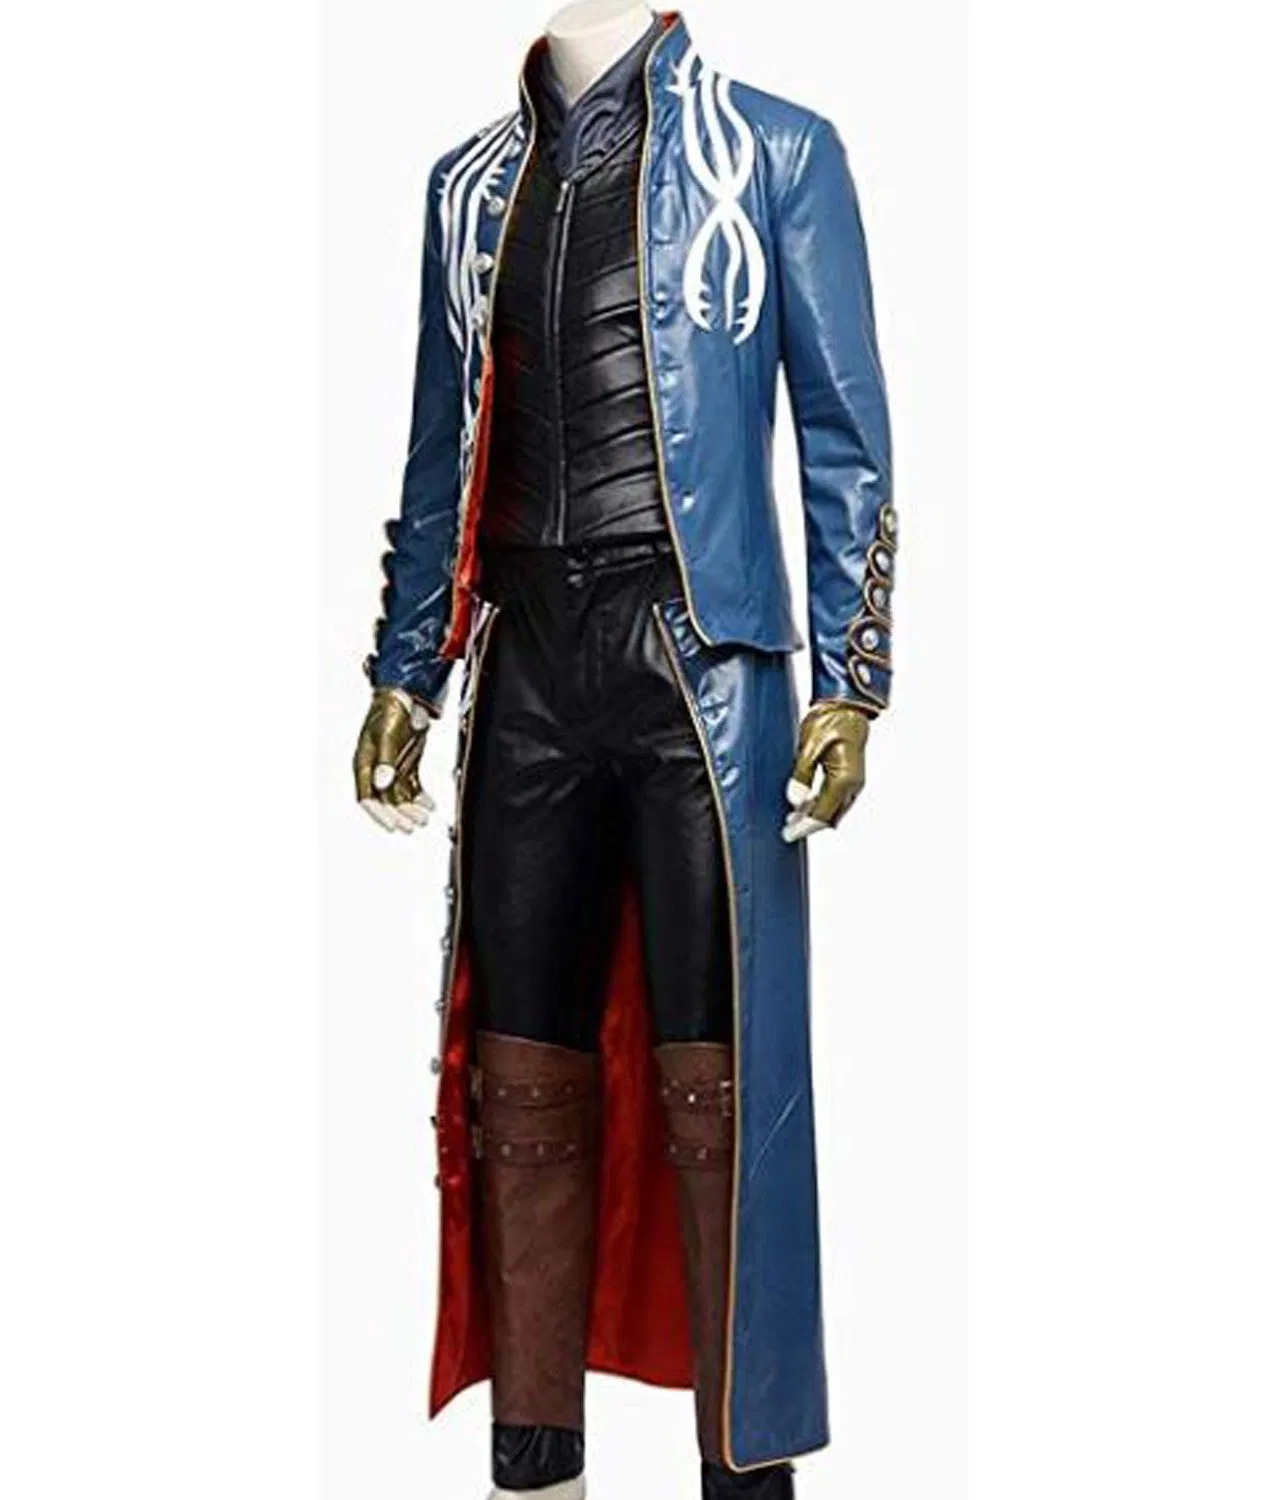 Vergil Devil May Cry 5 Black Leather Trench Coat